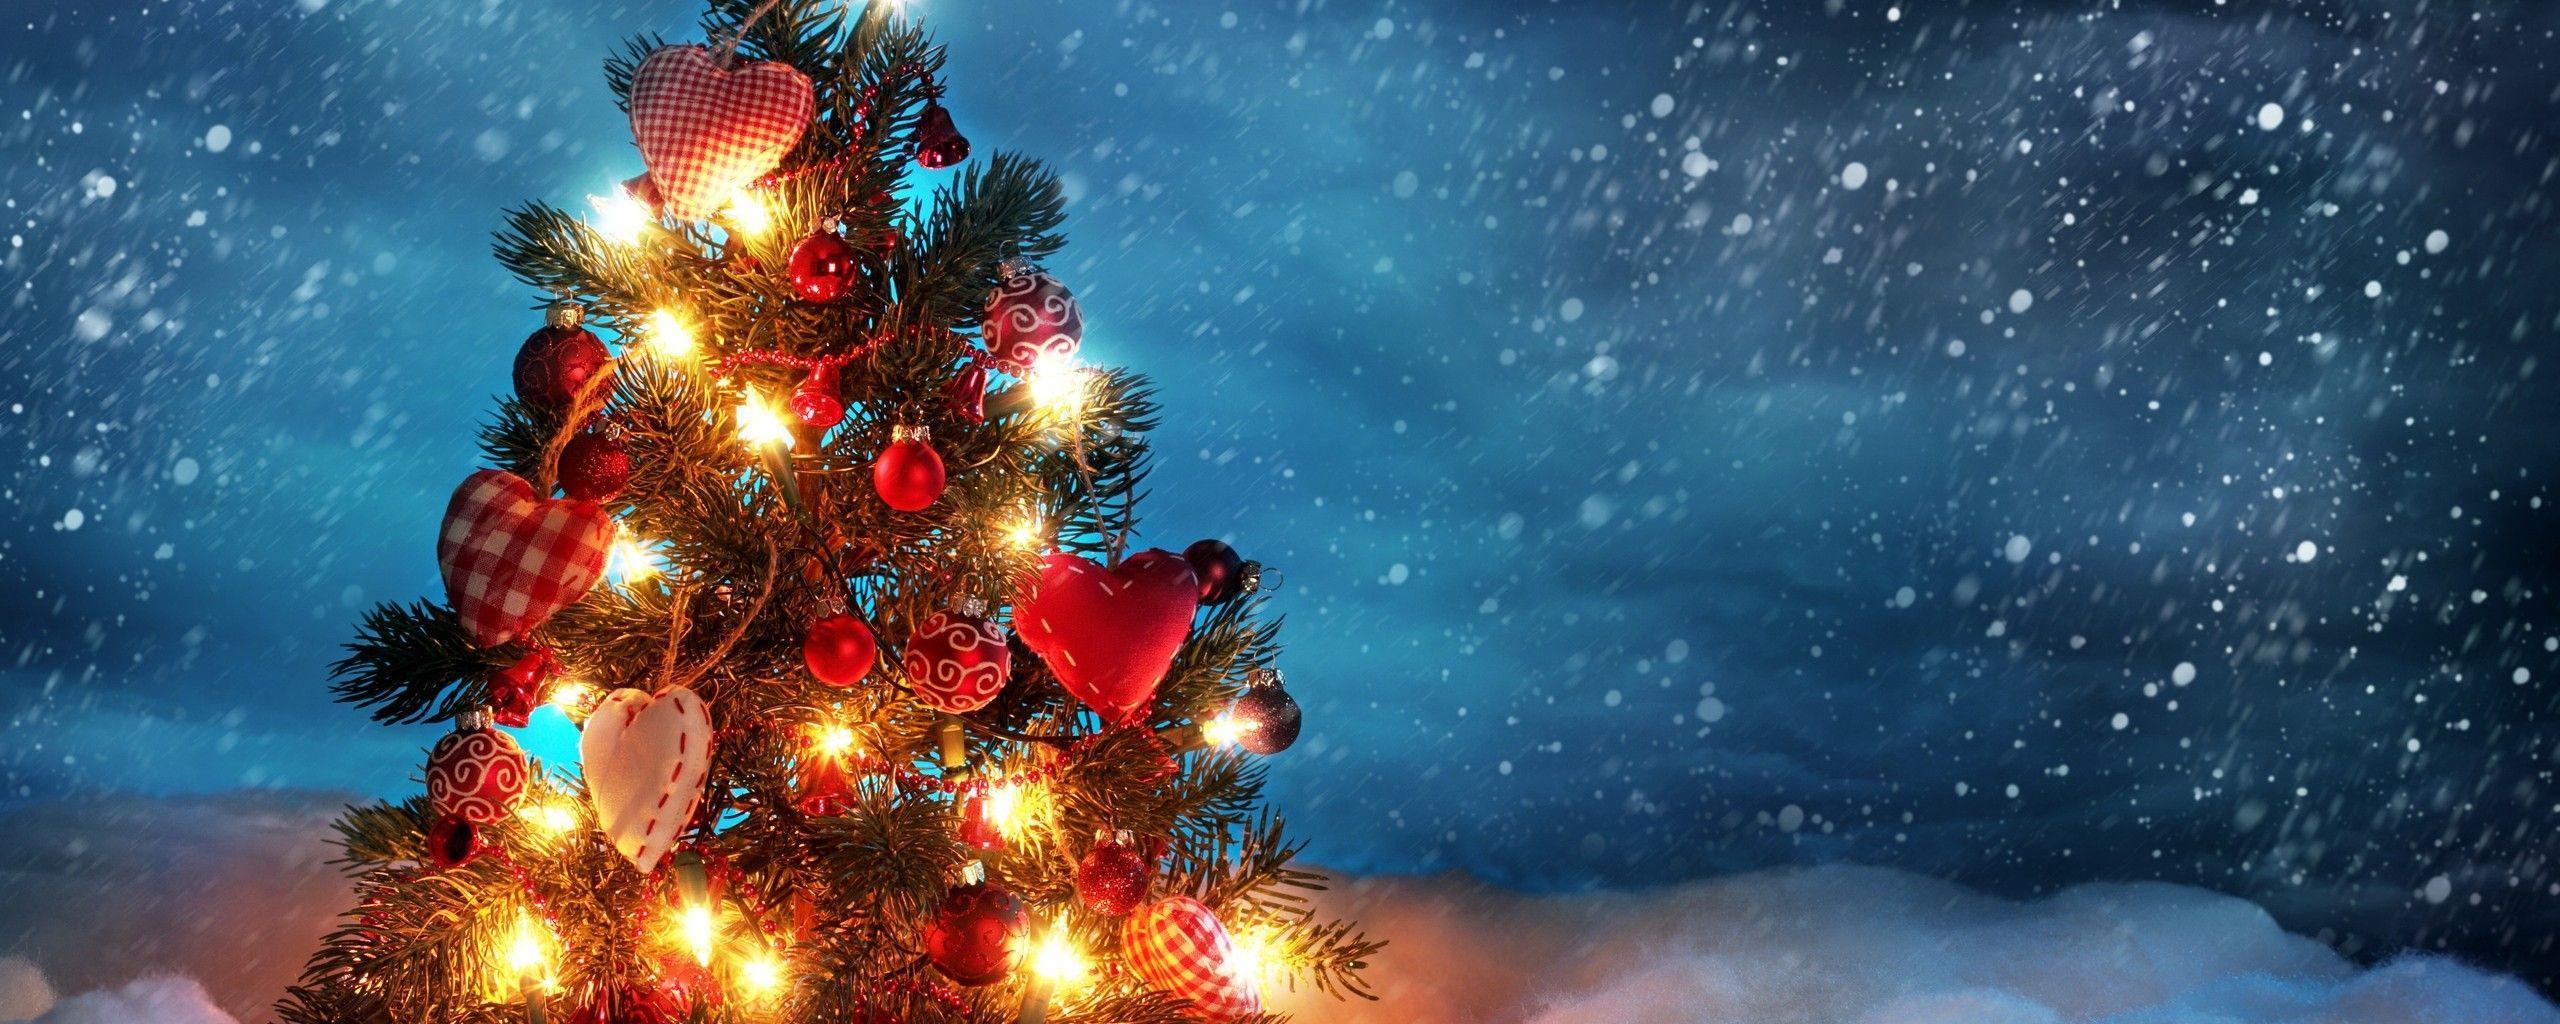 Download Dual Screen Christmas Wallpaper, HD Background Download